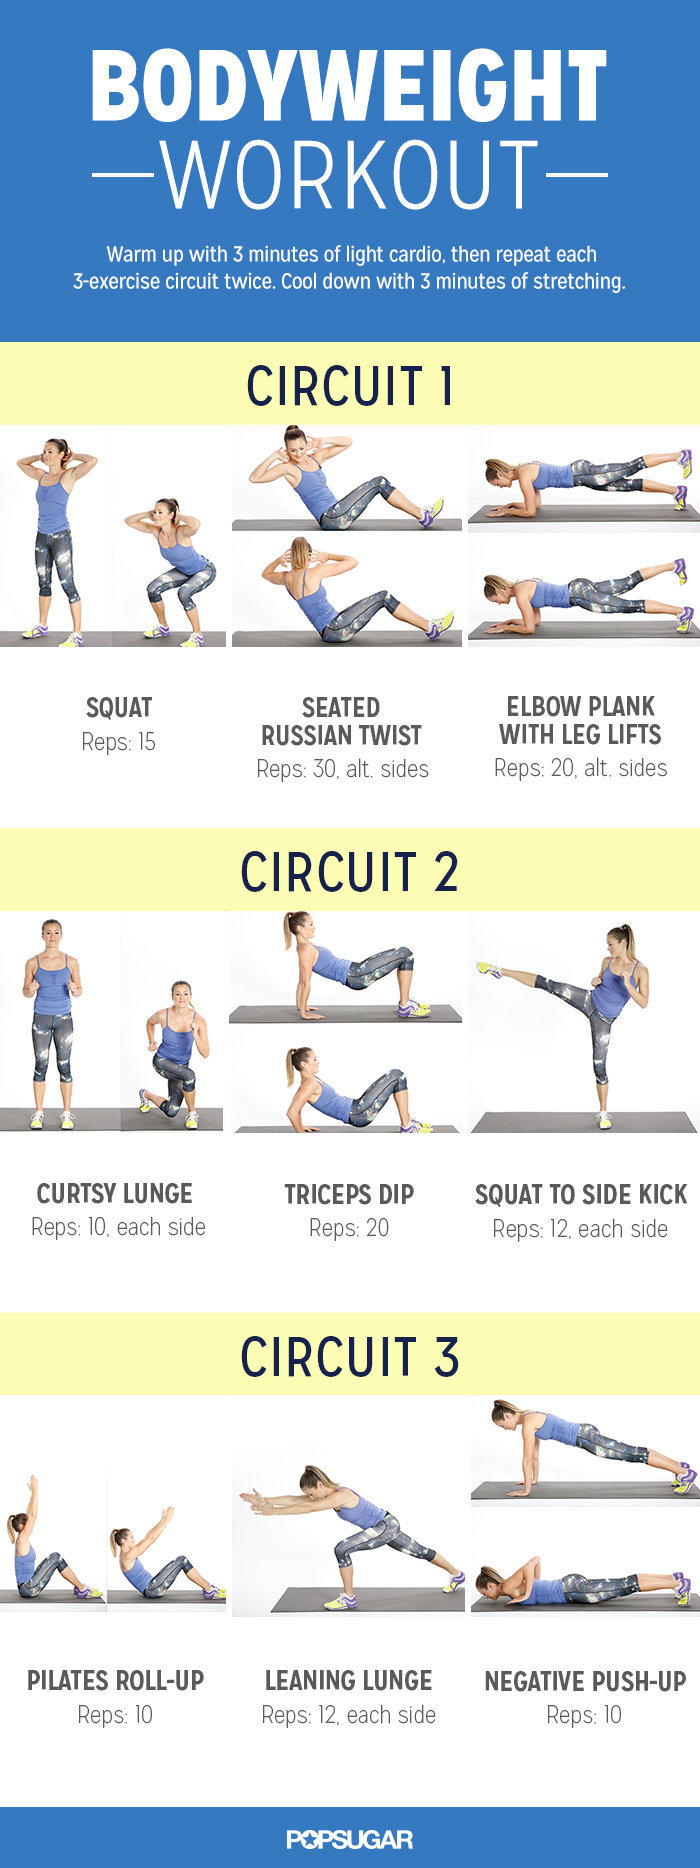 Fitness, Health & Well-Being | This At-Home Bodyweight Workout Leaves